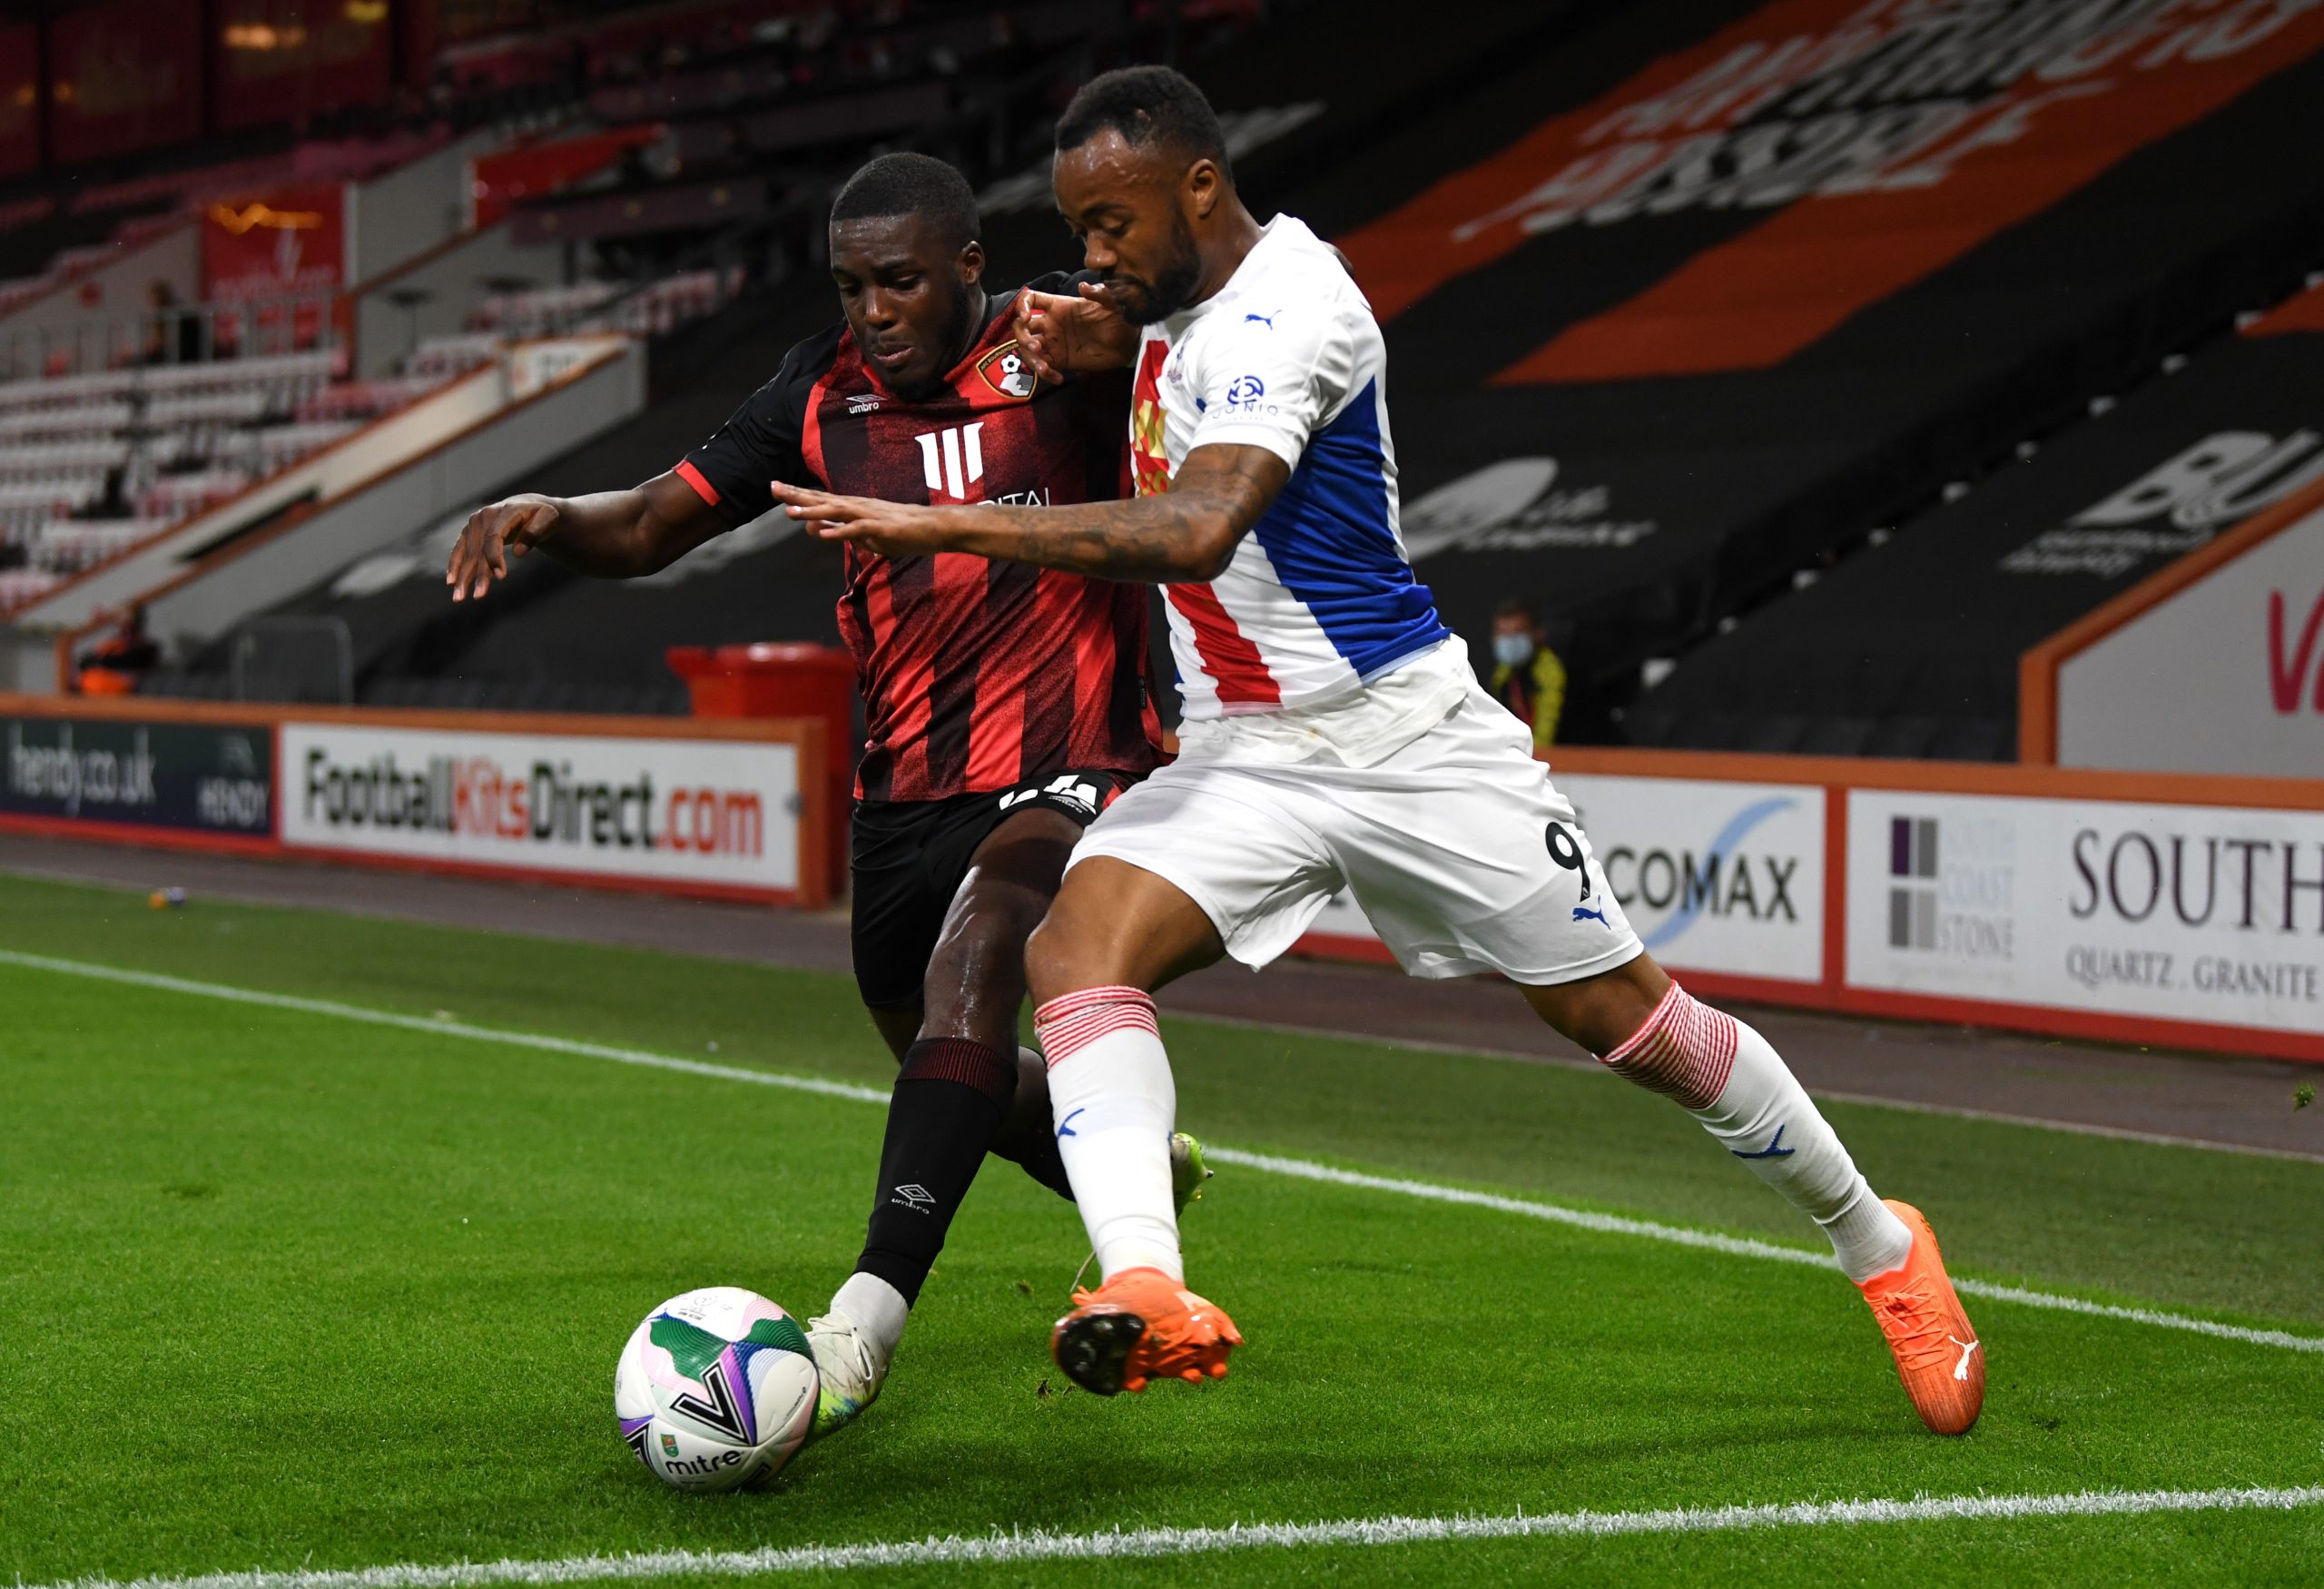 BOURNEMOUTH, ENGLAND - SEPTEMBER 15: Nnamdi Ofoborh of AFC Bournemouth and Jordan Ayew of Crystal Palace battle for the ball  during the Carabao Cup Second Round match between AFC Bournemouth and Crystal Palace at Vitality Stadium on September 15, 2020 in Bournemouth, England. (Photo by Neil Hall - Pool/Getty Images)